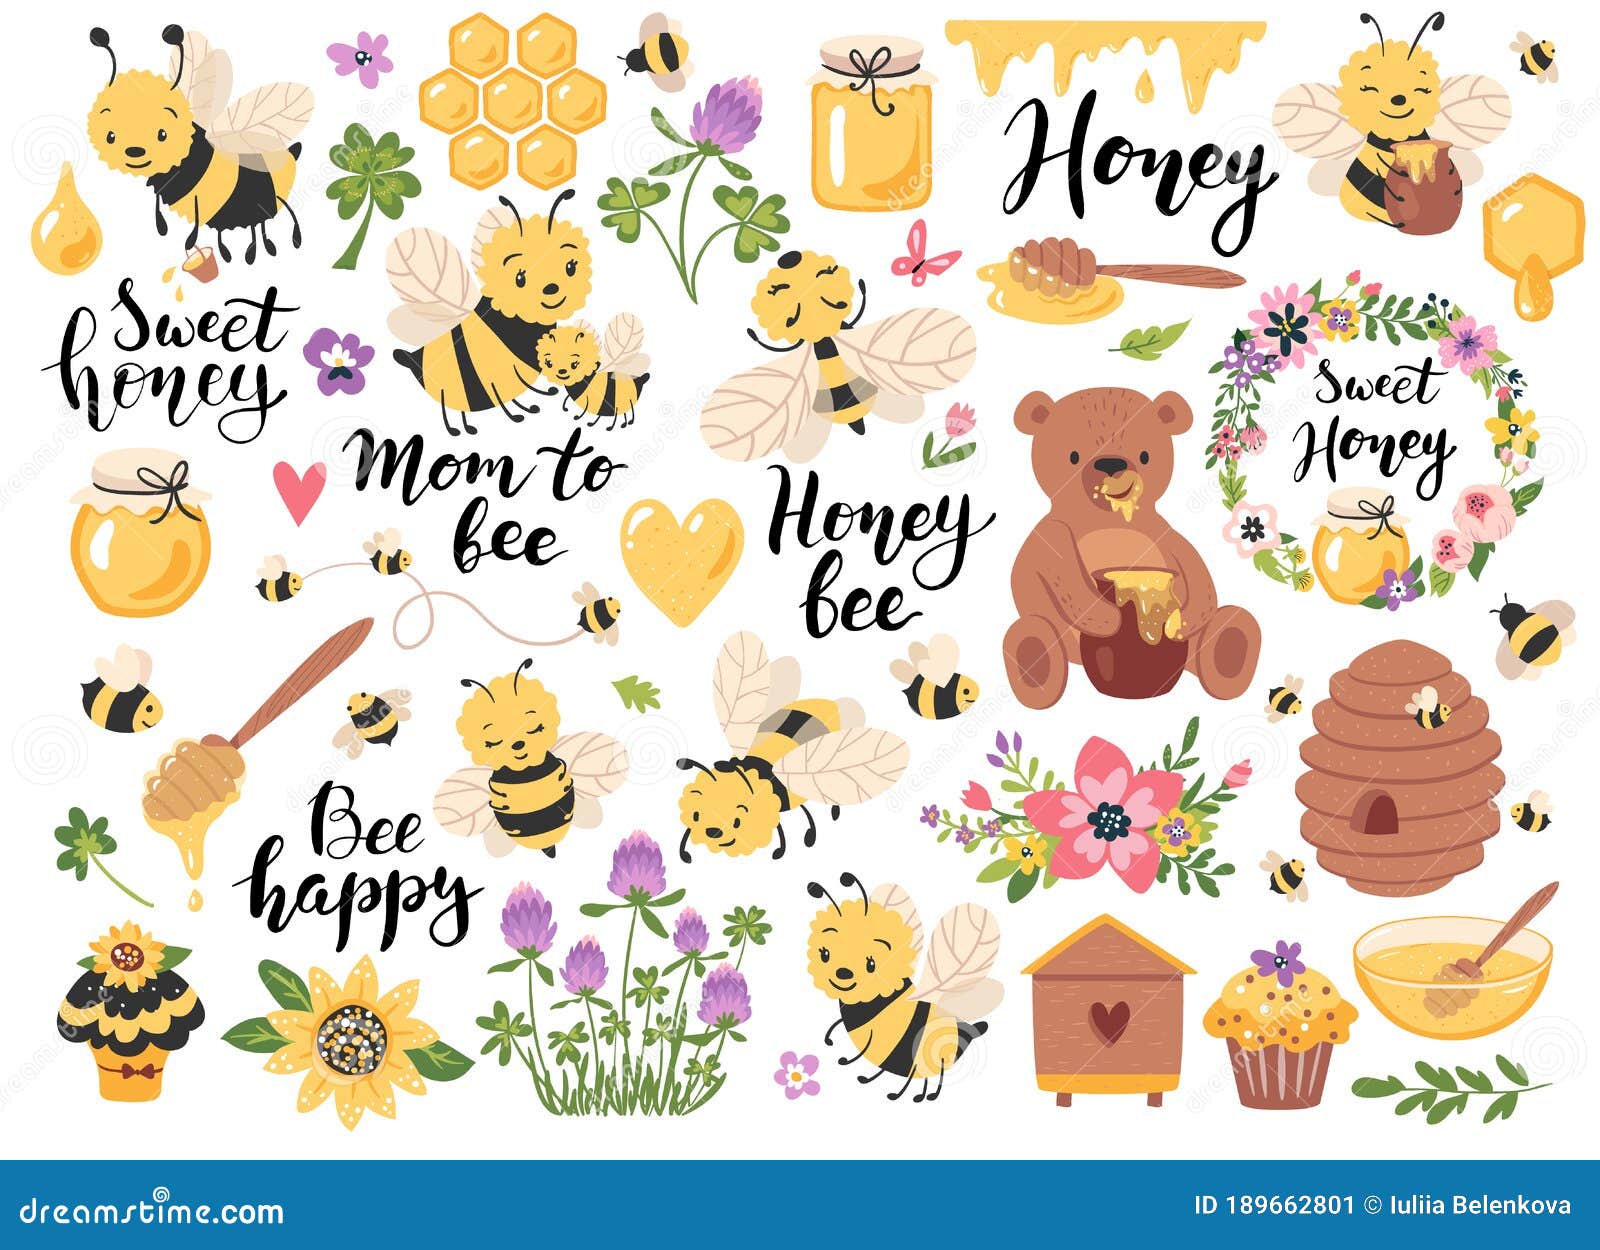 honey, bees, quotes and beekeeping set